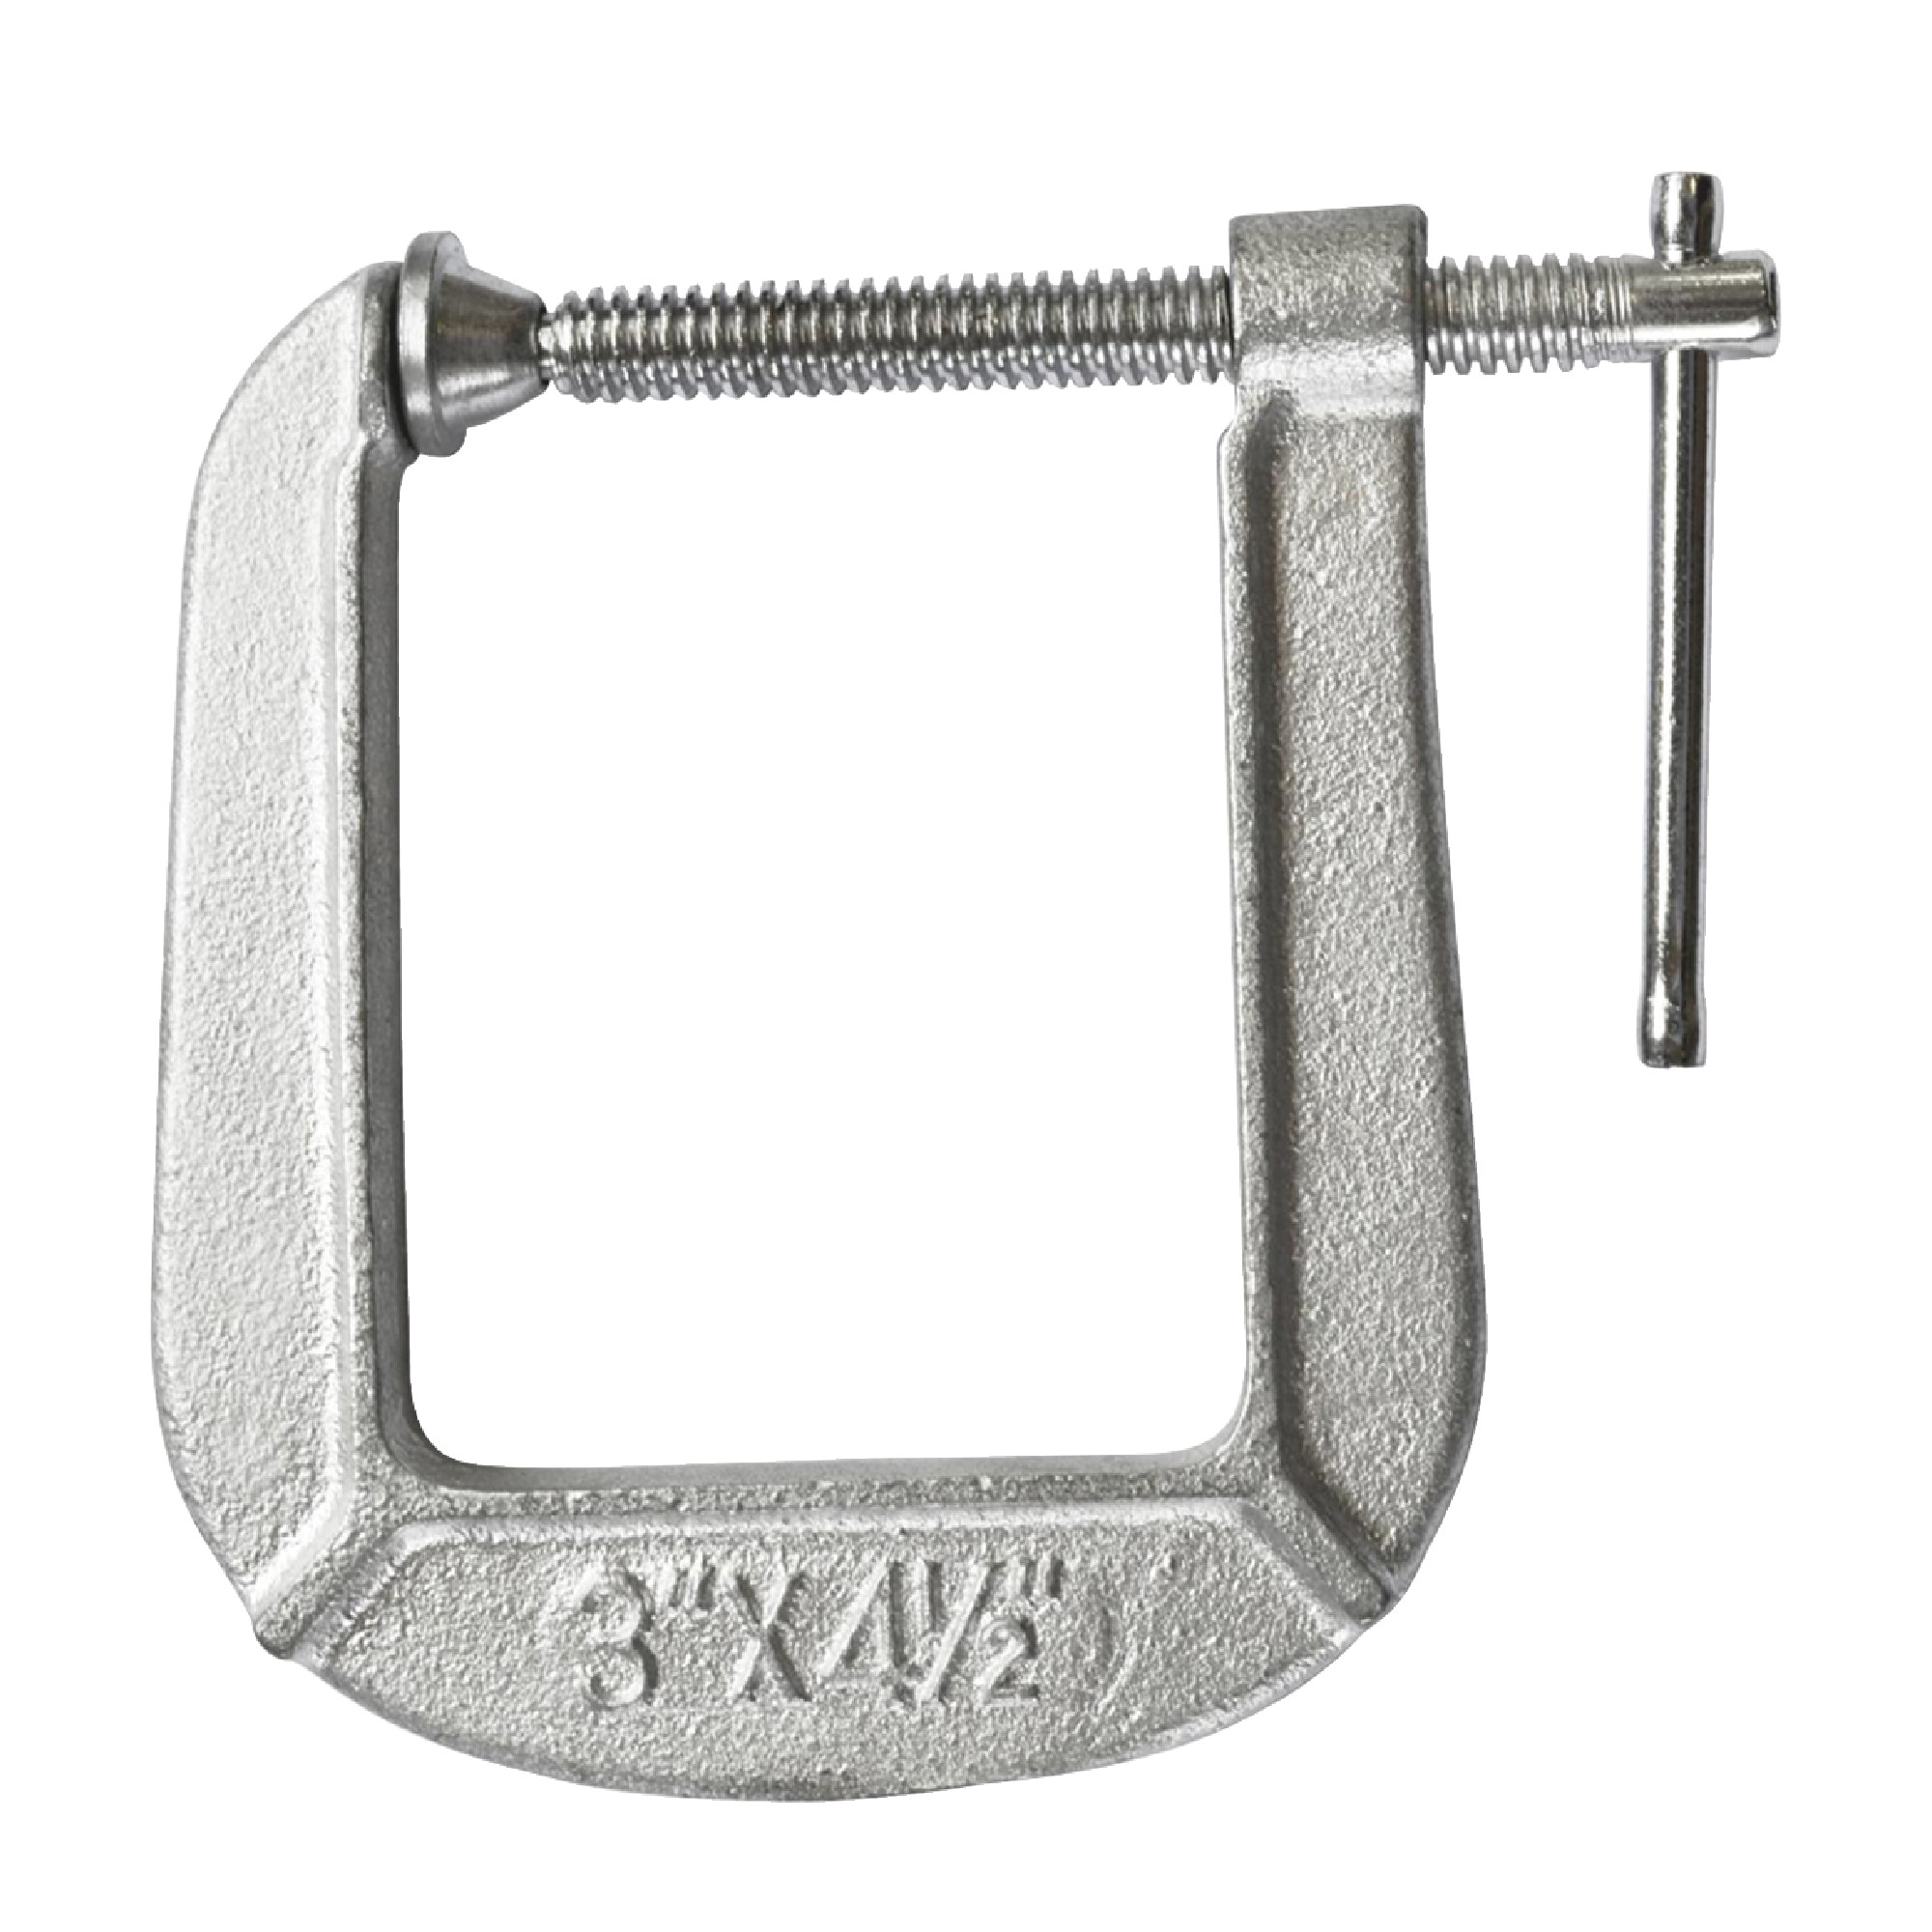 Drop Forged C Clamp